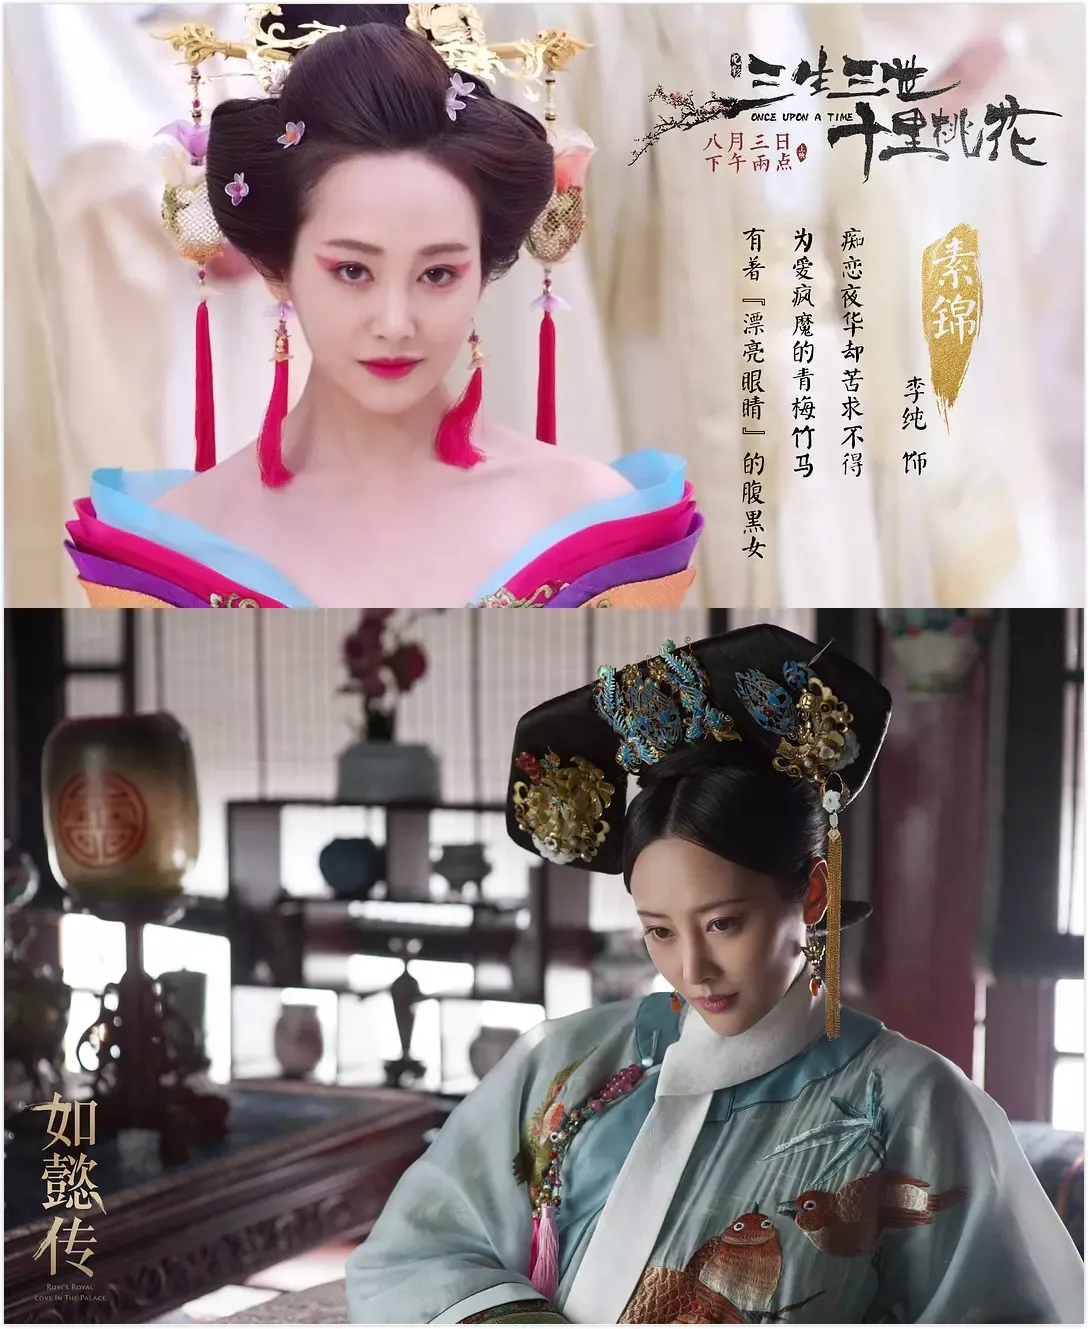 4. 'villain two' Chun Li is scolded to fall to weibo for realistic acting. JPG